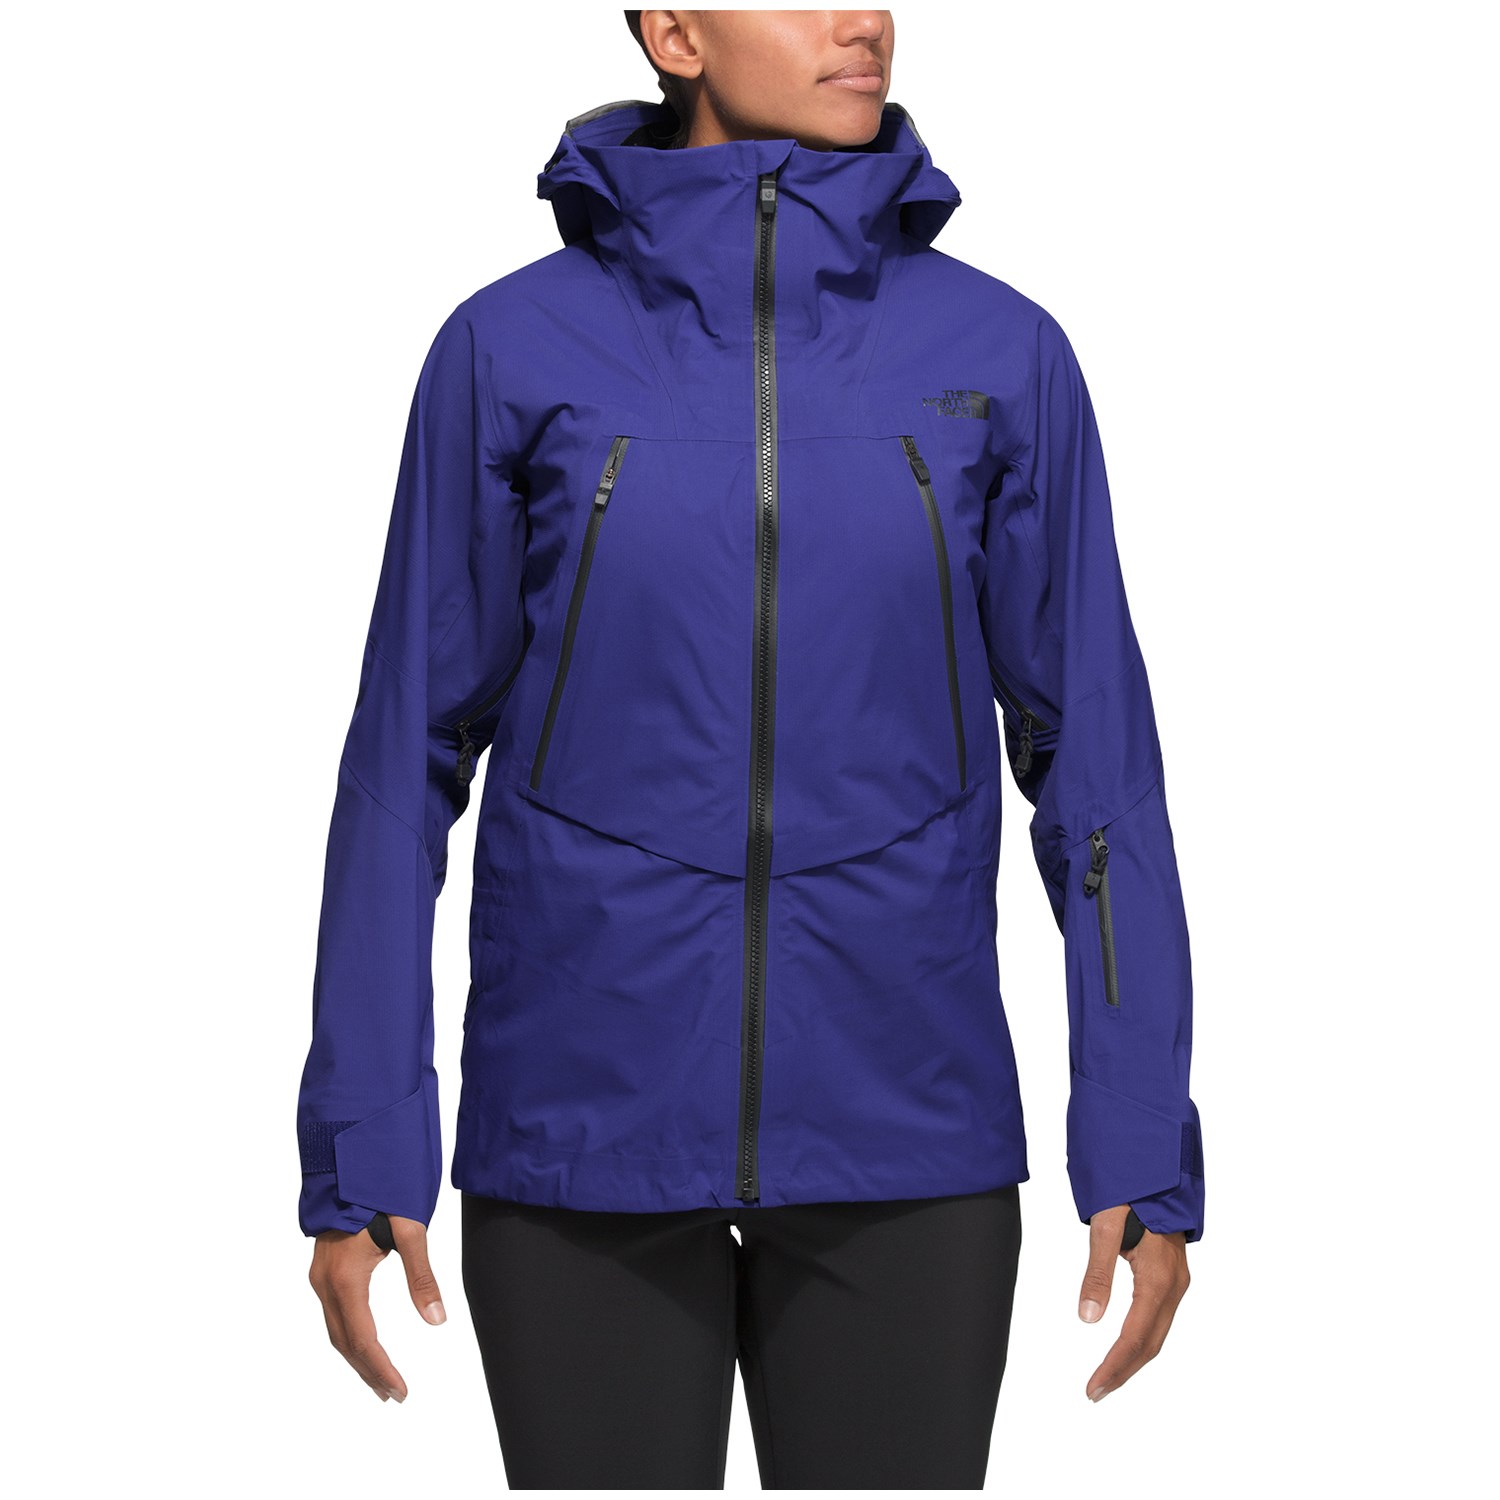 north face purist triclimate jacket review